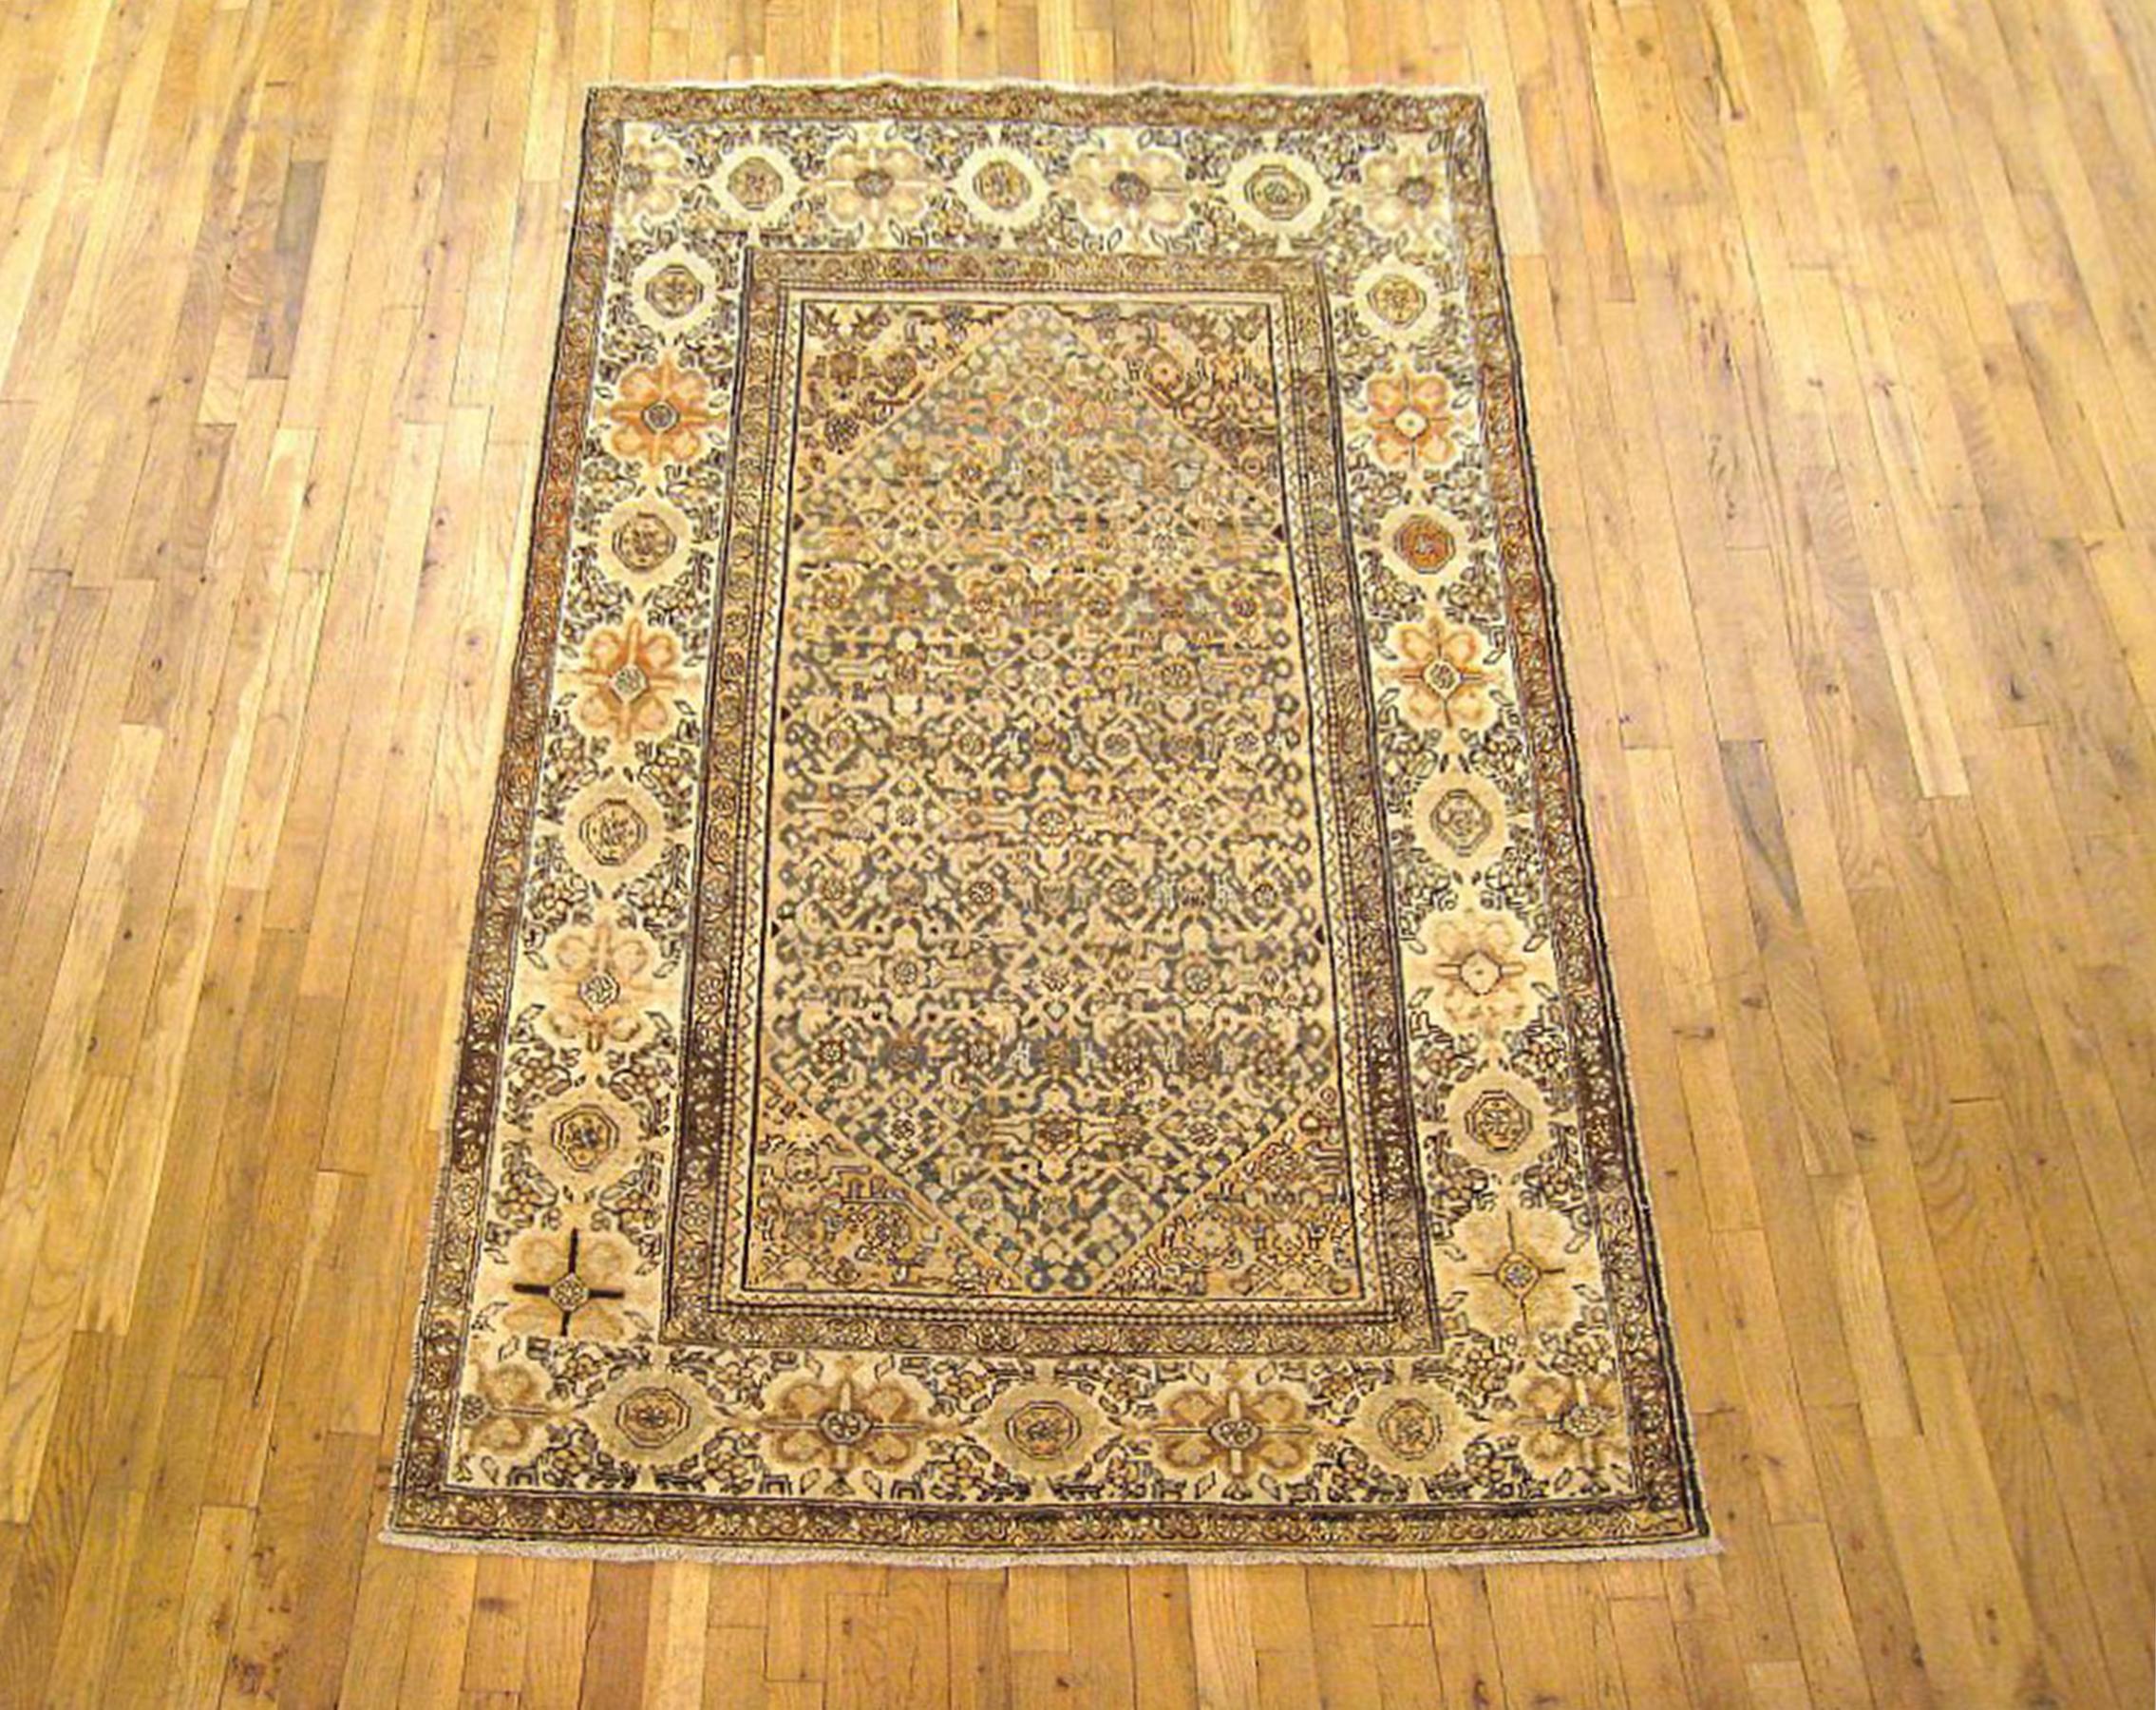 Antique Persian Malayer oriental rug in small size

An antique Persian Malayer oriental rug, circa 1910. Size 6'5